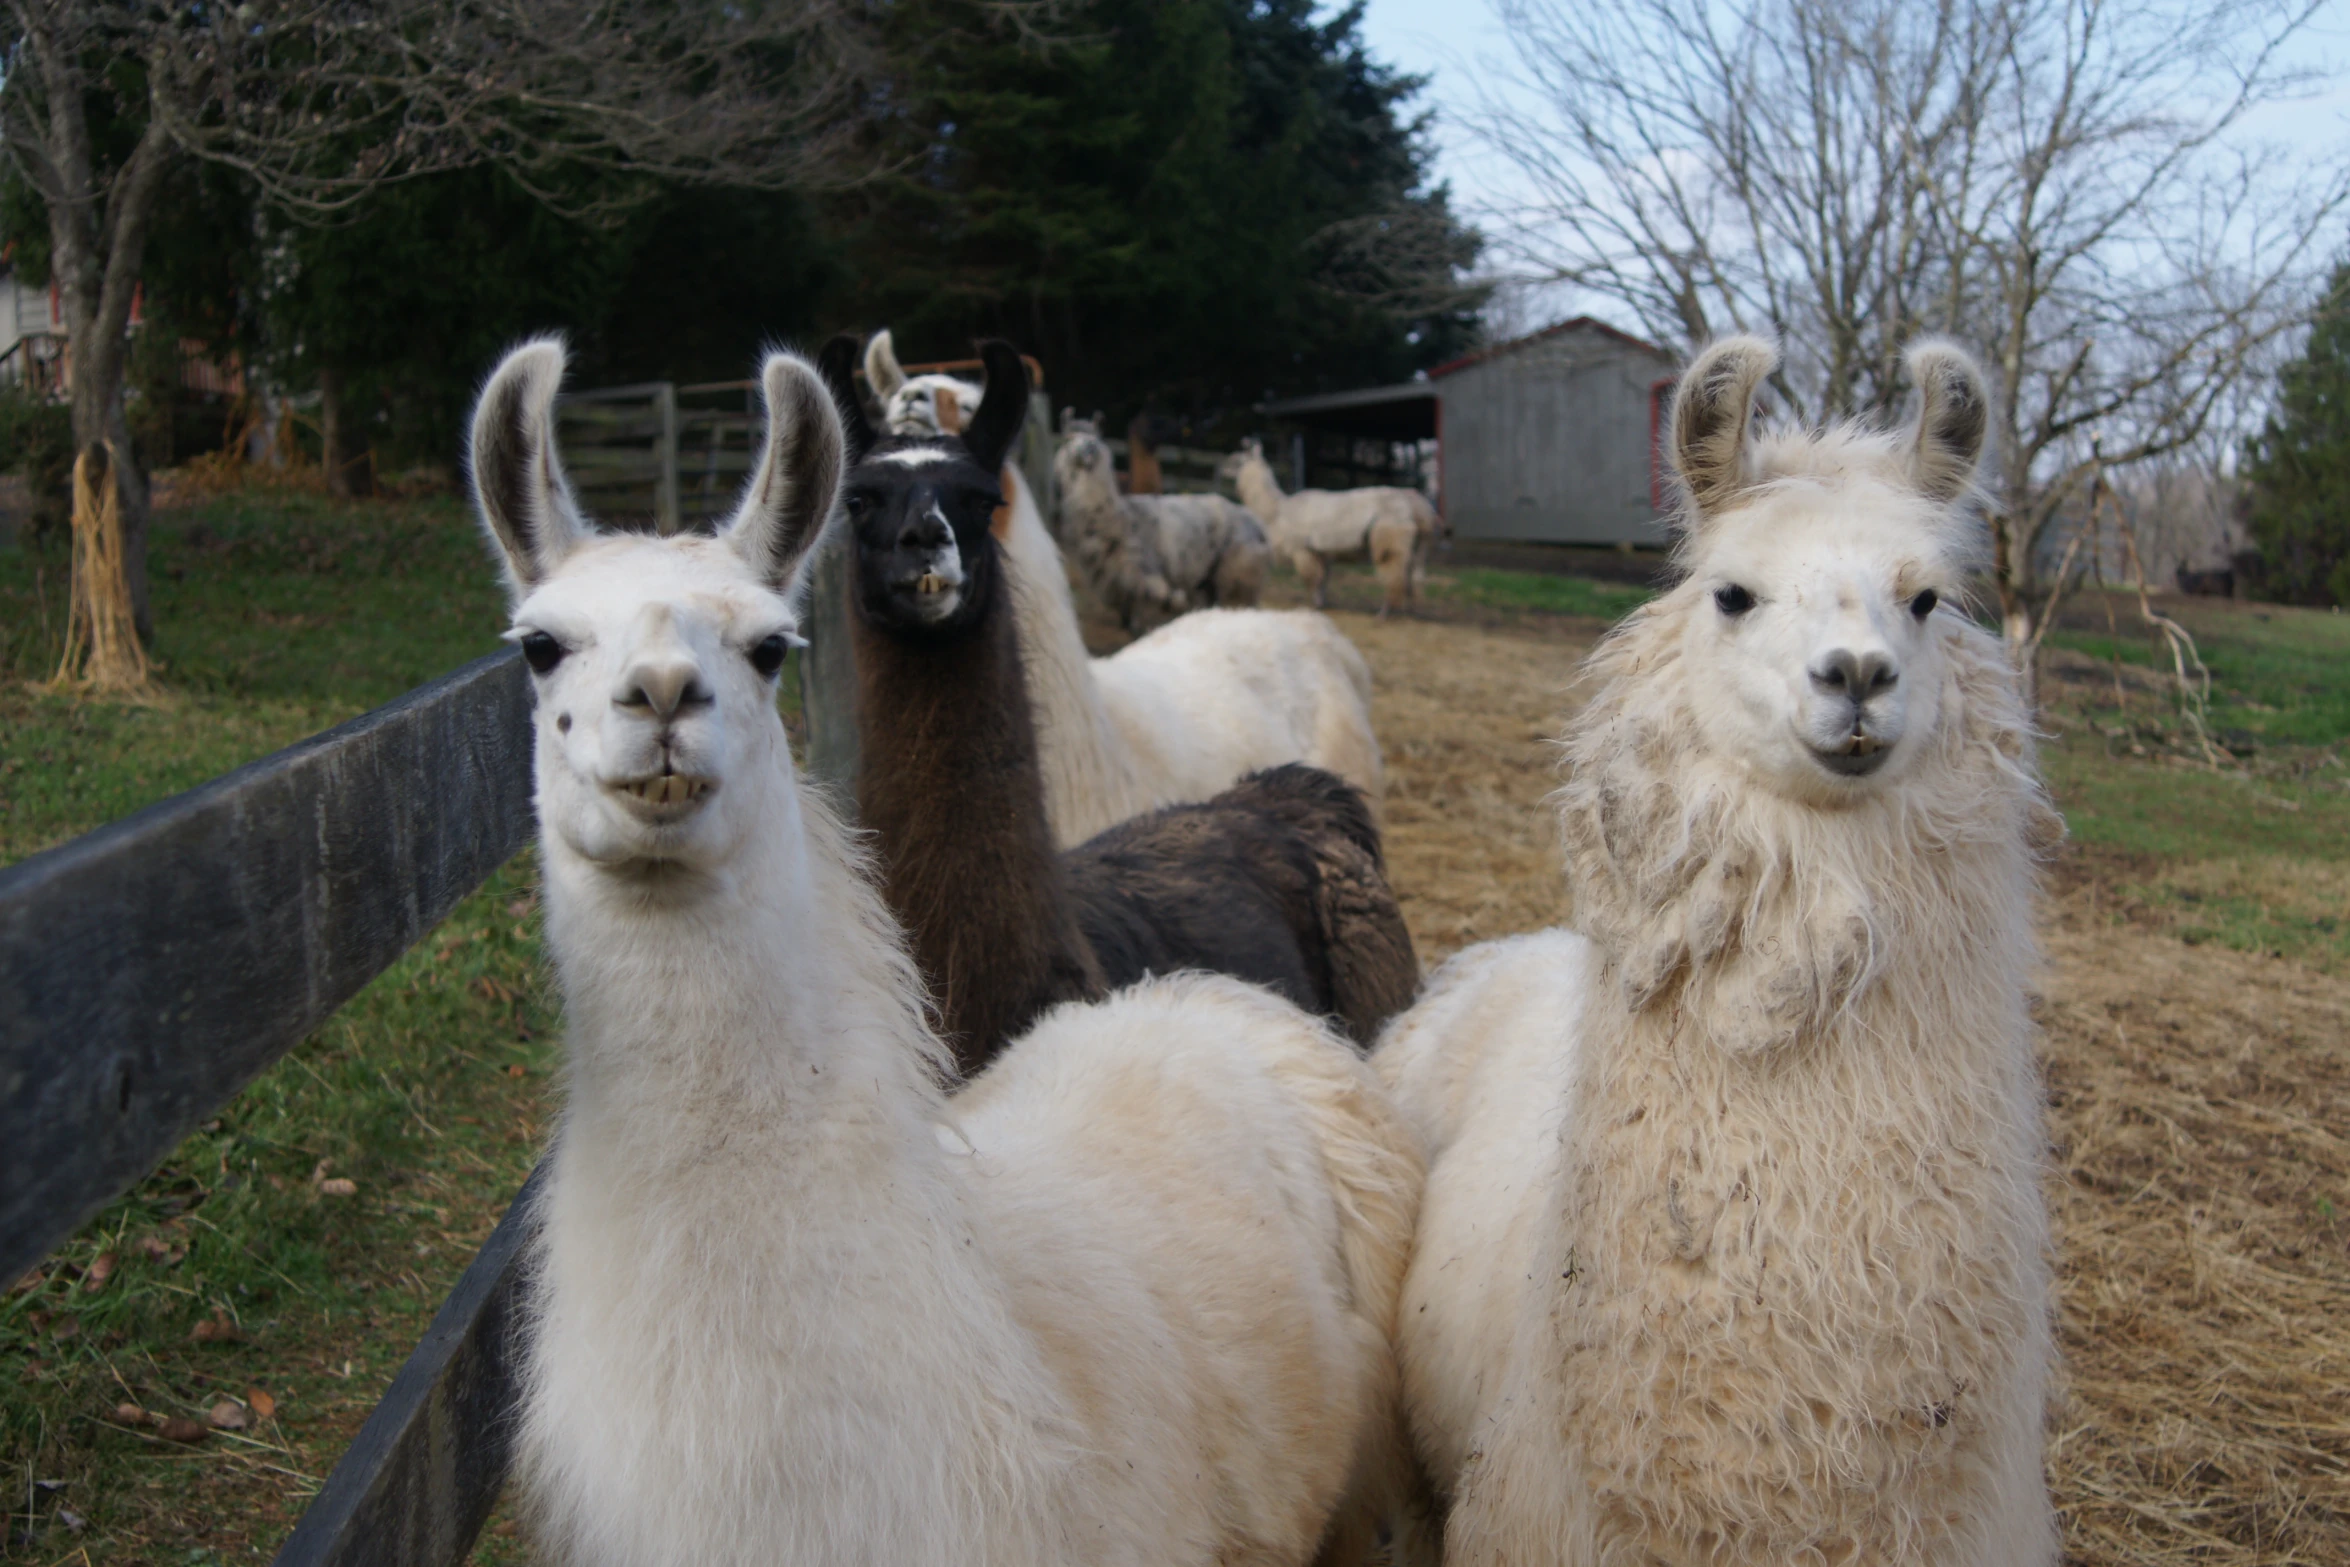 an image of a herd of llamas grazing on the field